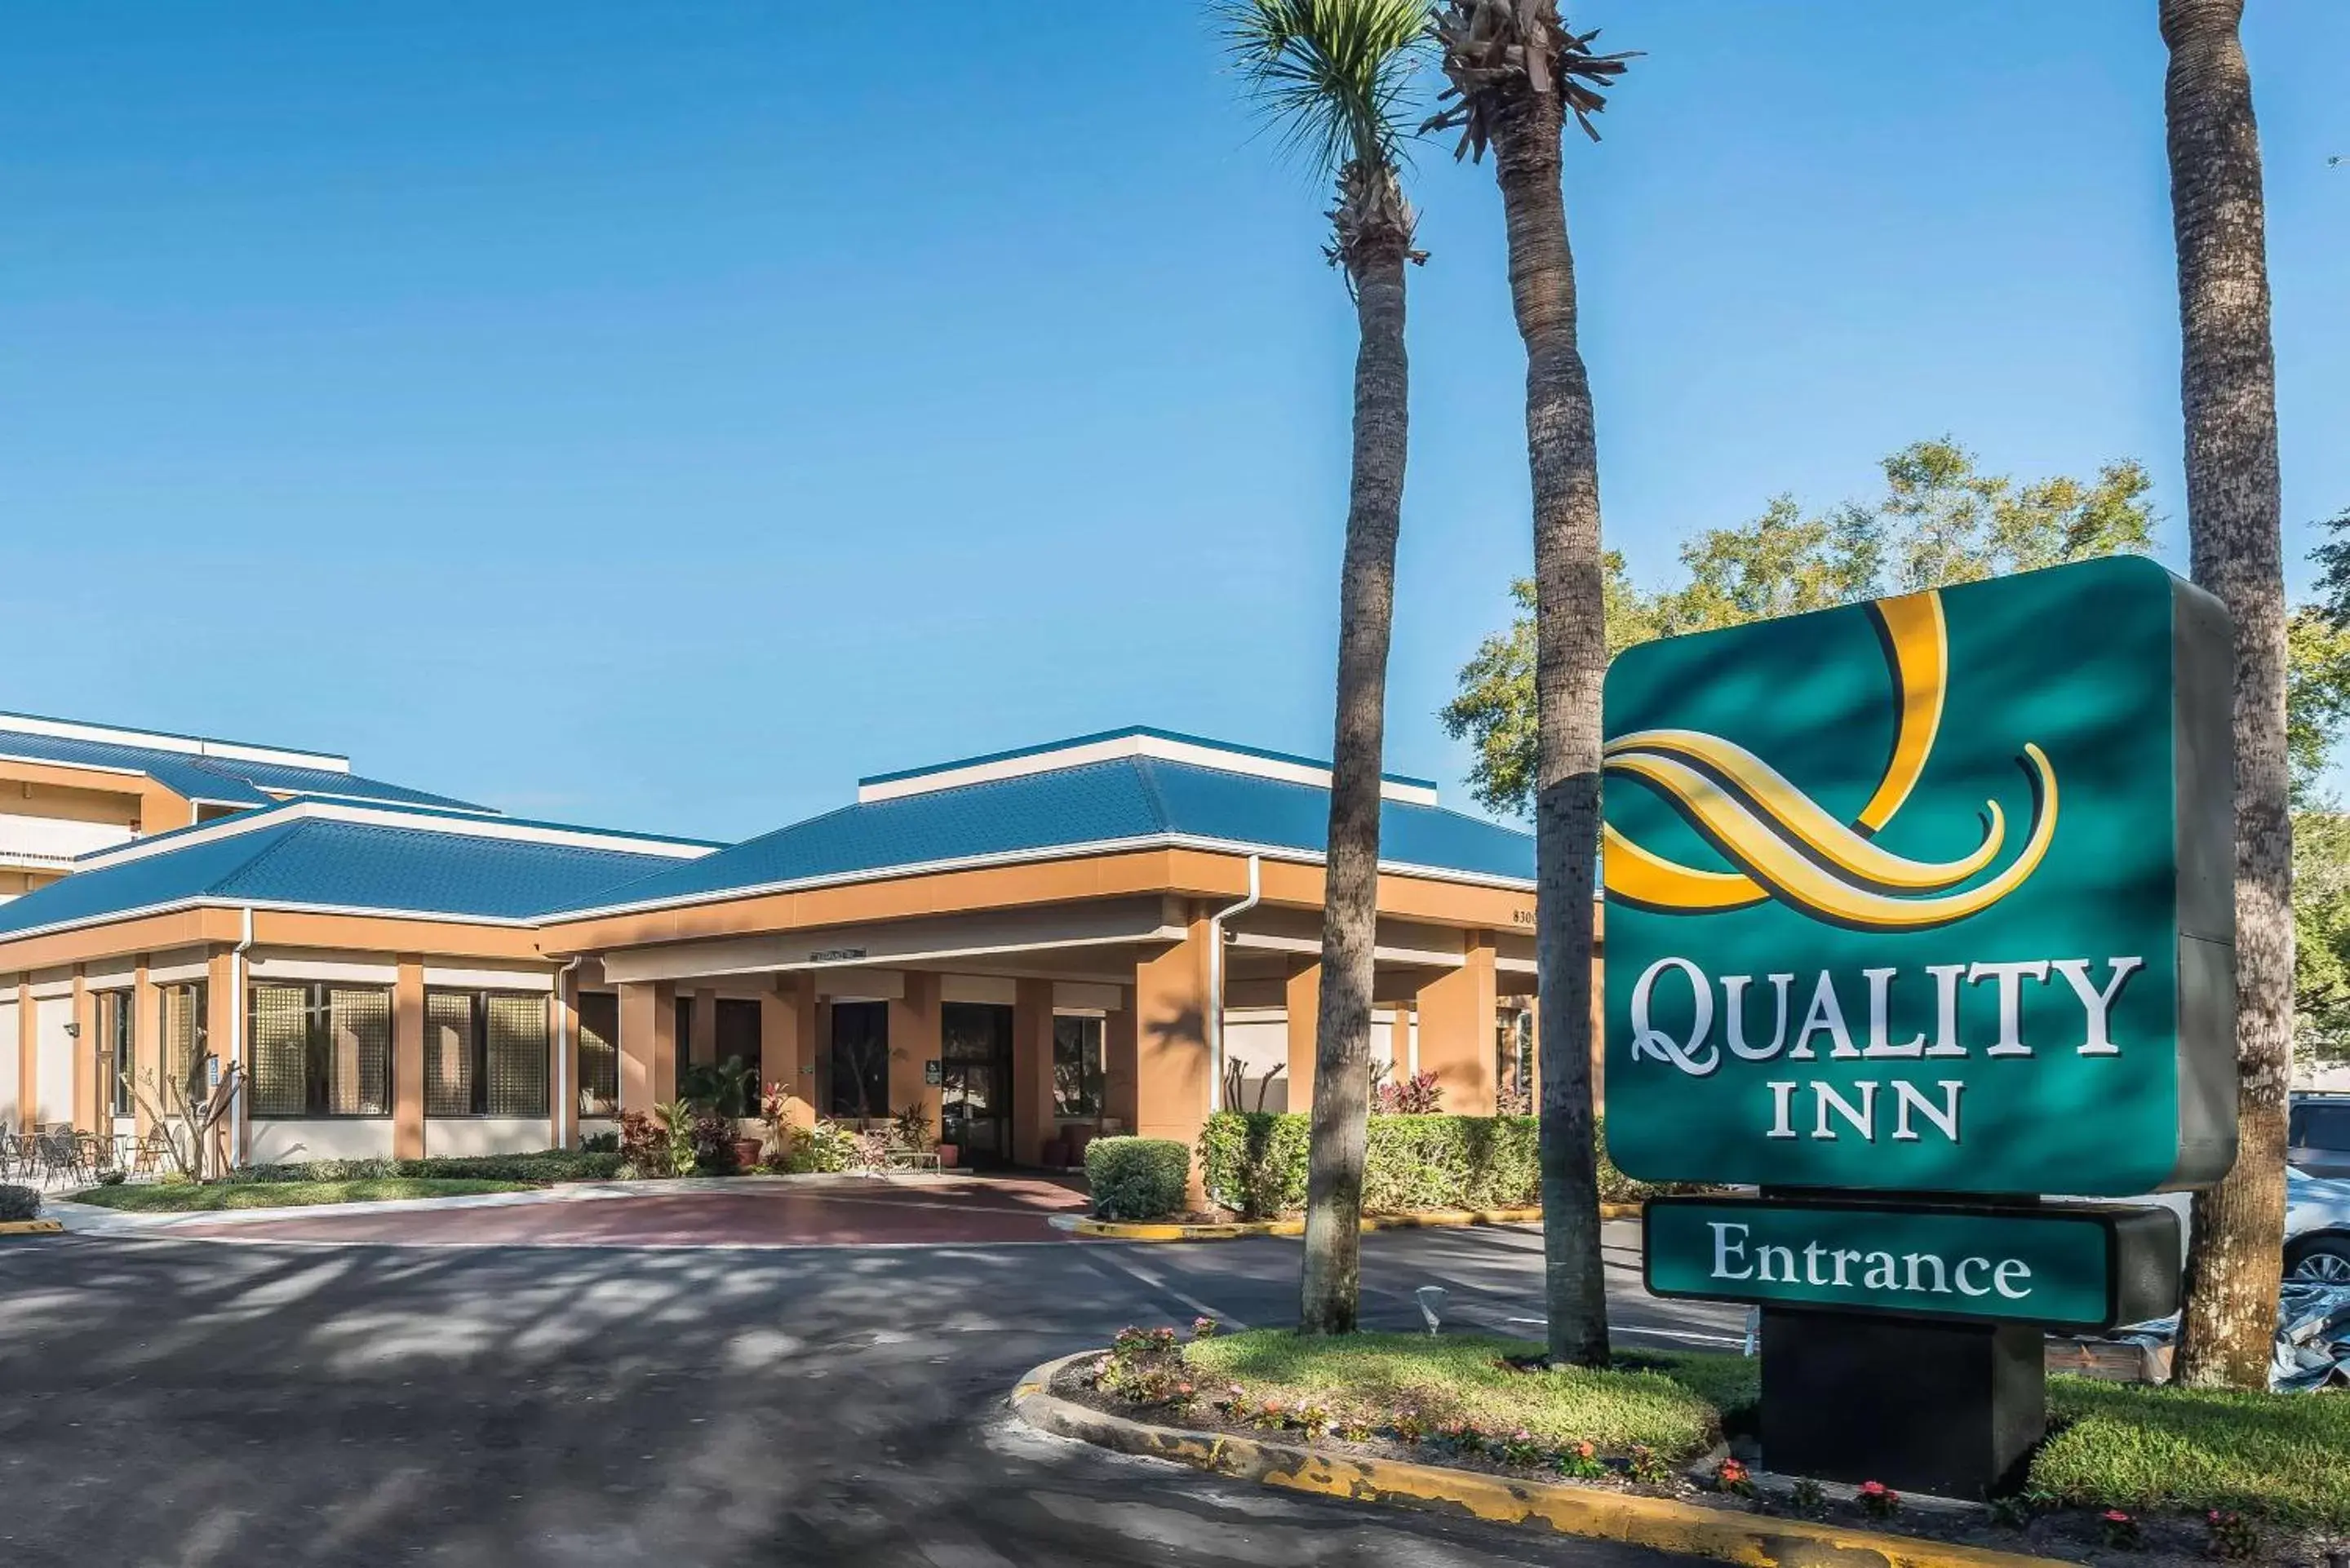 Property Building in Quality Inn At International Drive Orlando